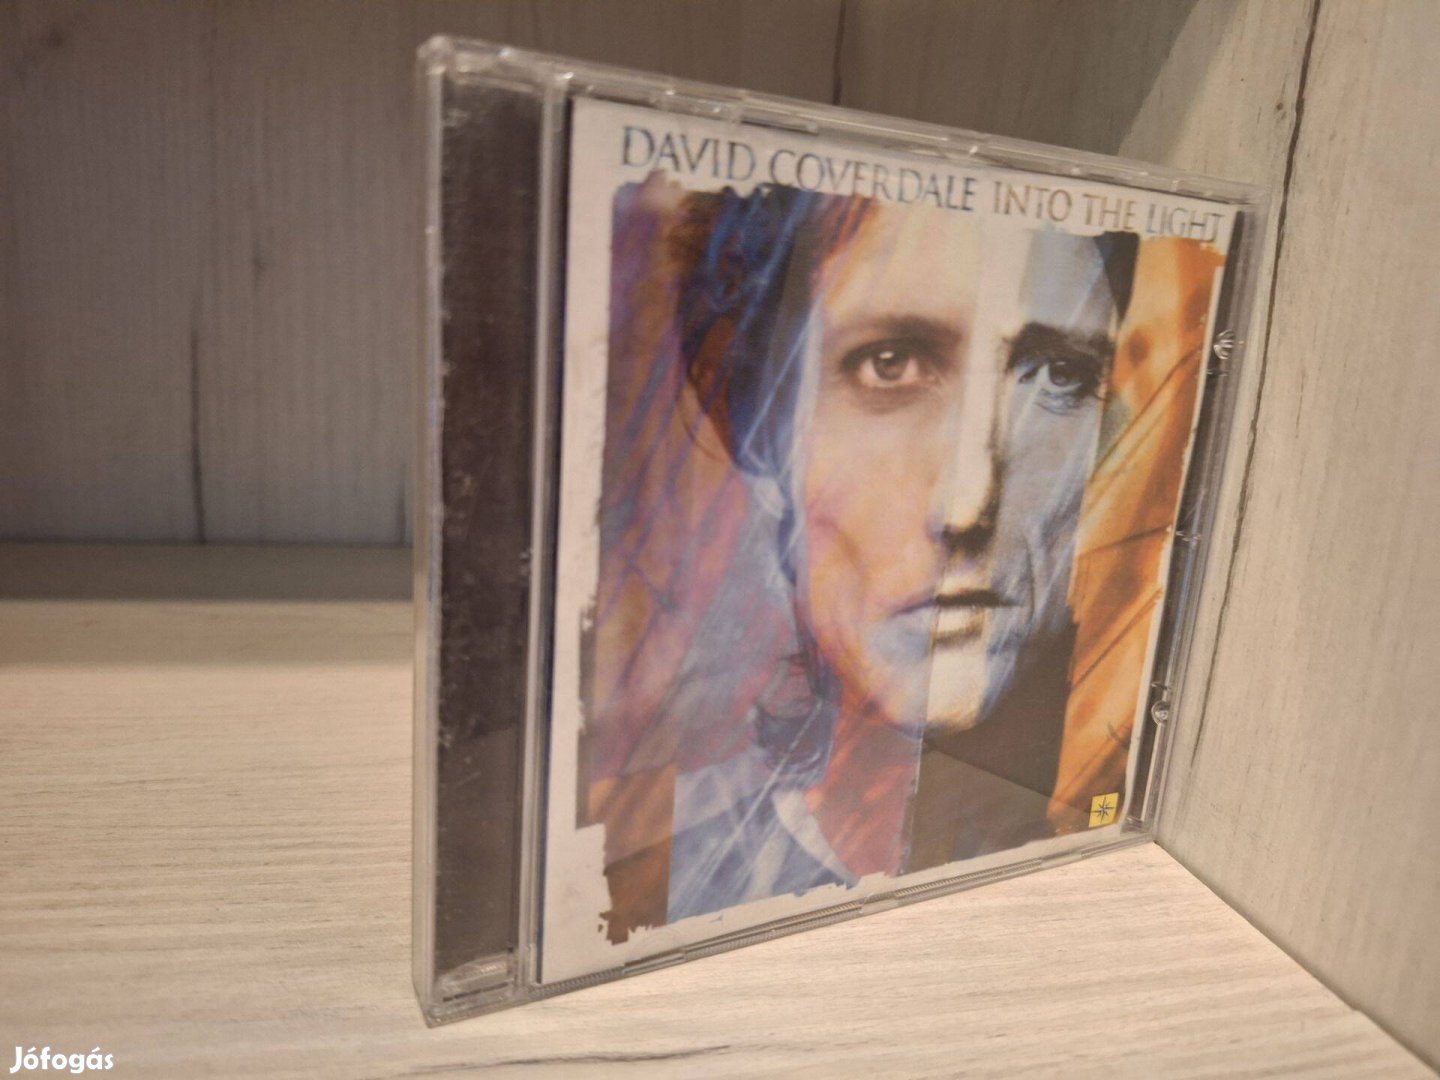 David Coverdale - Into The Light CD